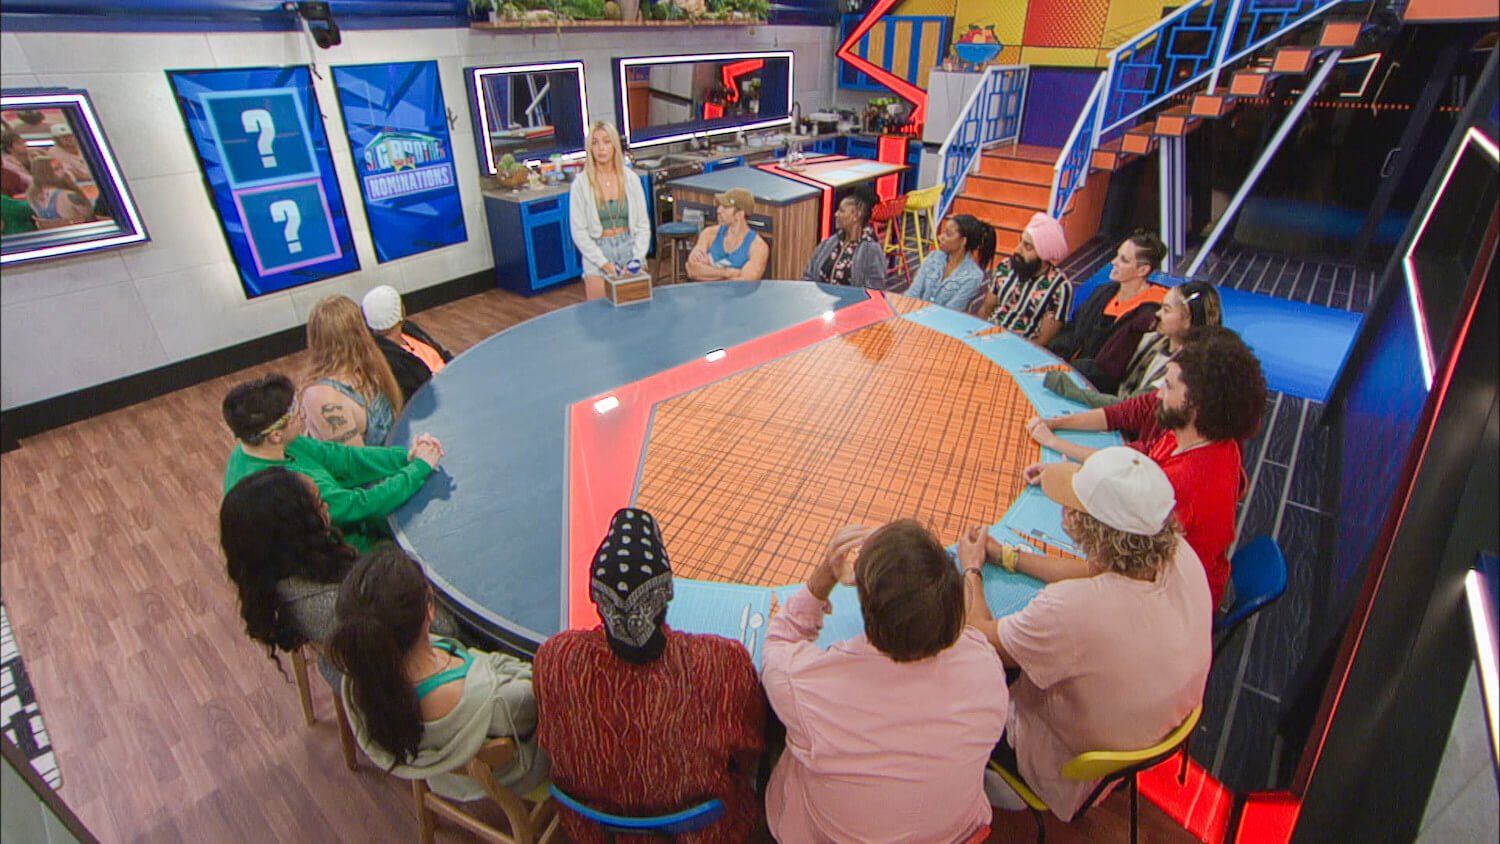 'Big Brother' Season 25 Week 1 houseguests around a round table with Reilly standing and speaking